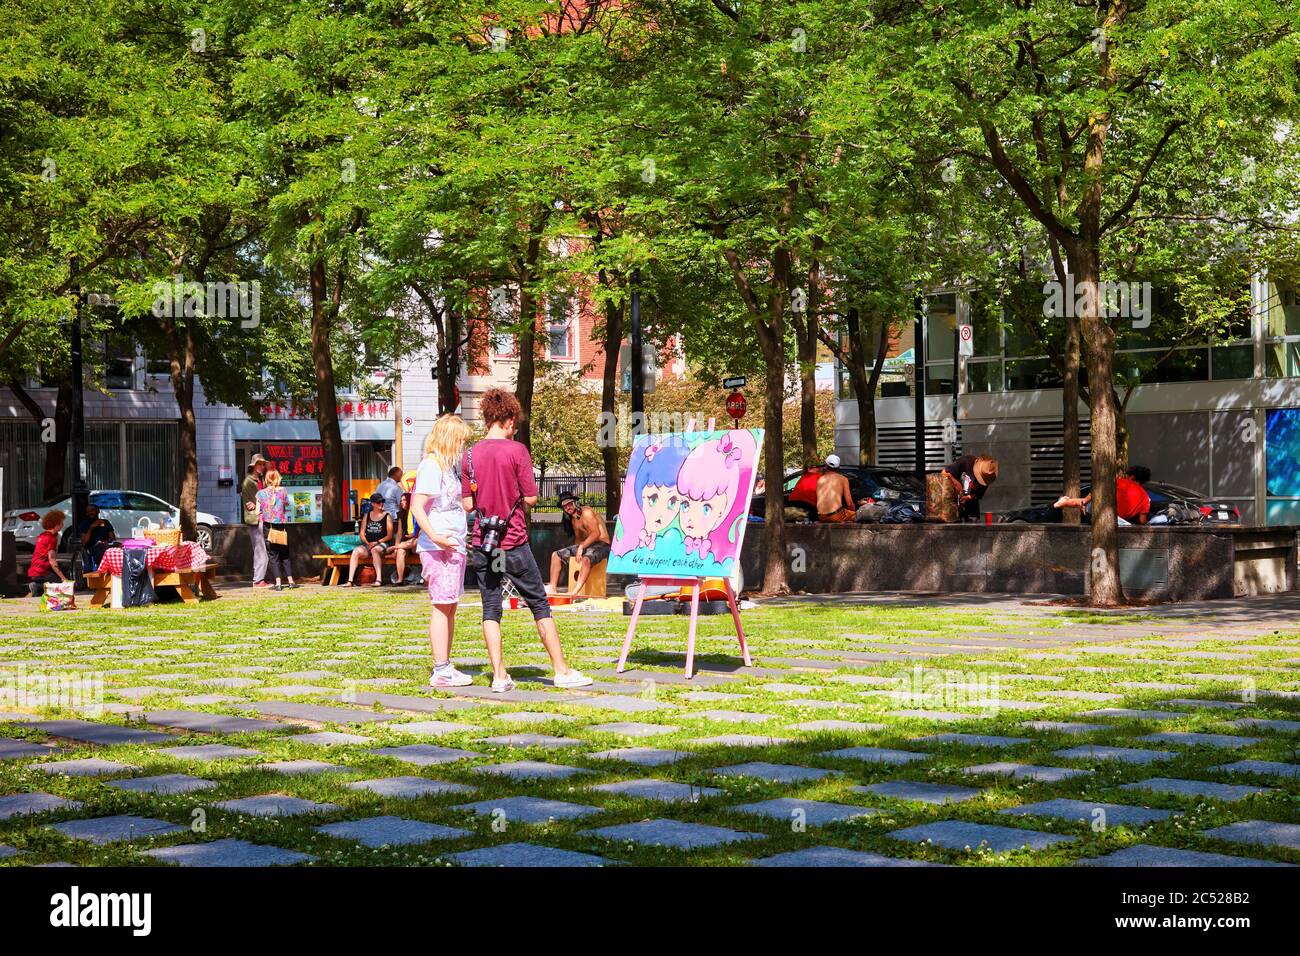 Montreal, Canada - June, 2018: Young Canadian couple looking at a painting in peace park or place de la paix in Montreal, Quebec, Canada. Stock Photo